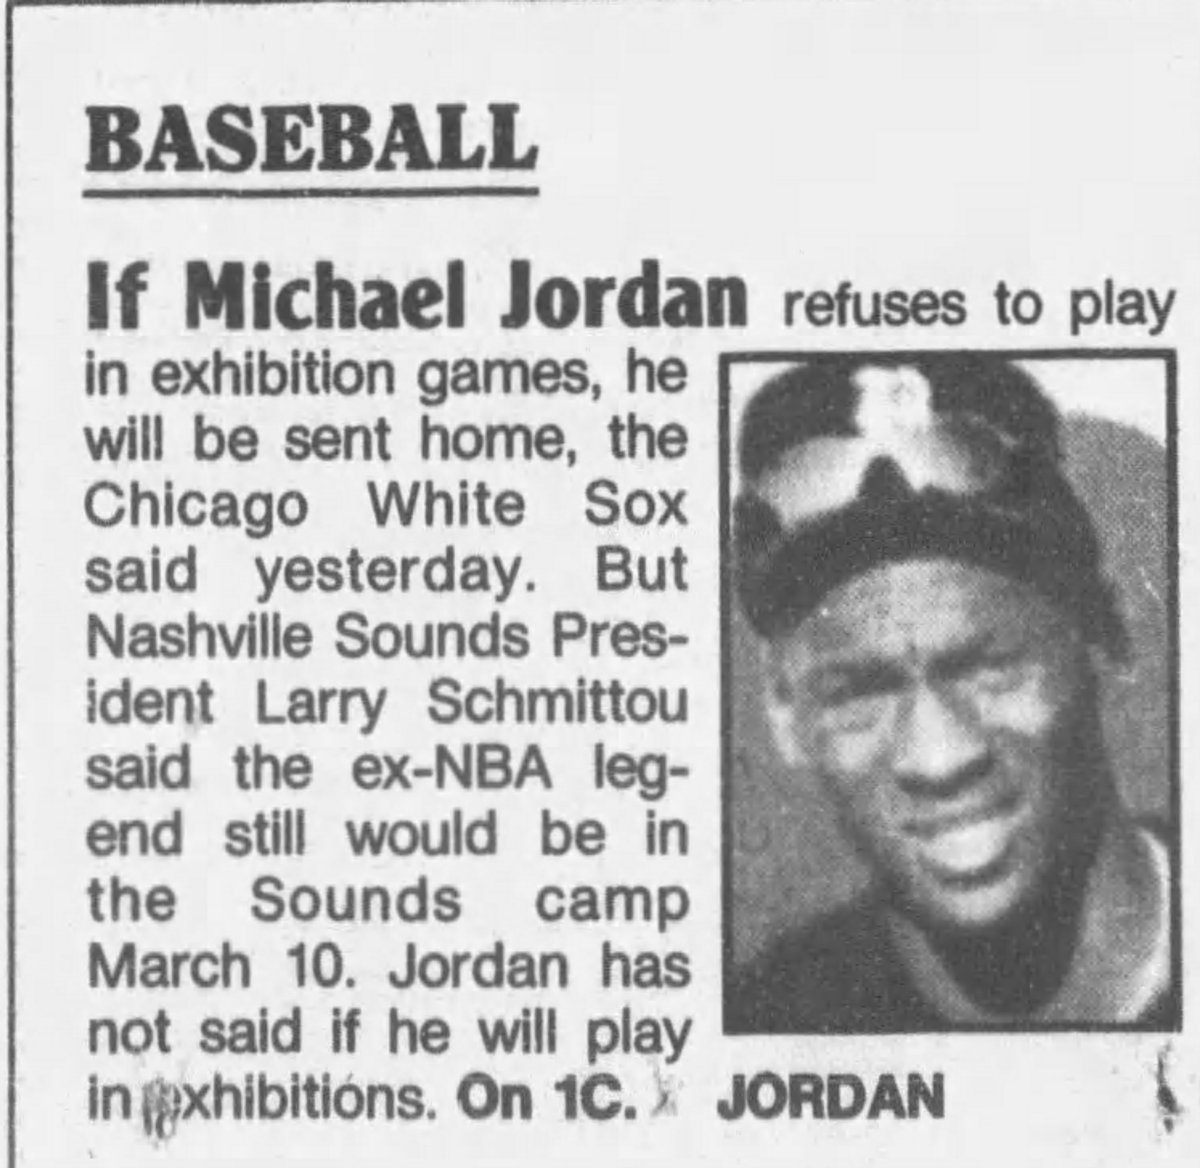 The MLB strike that had canceled the 1994 World Series was still raging as the ‘95 season approached. A number of minor league players were concerned about being squeezed to become replacement players — Jordan in particular.